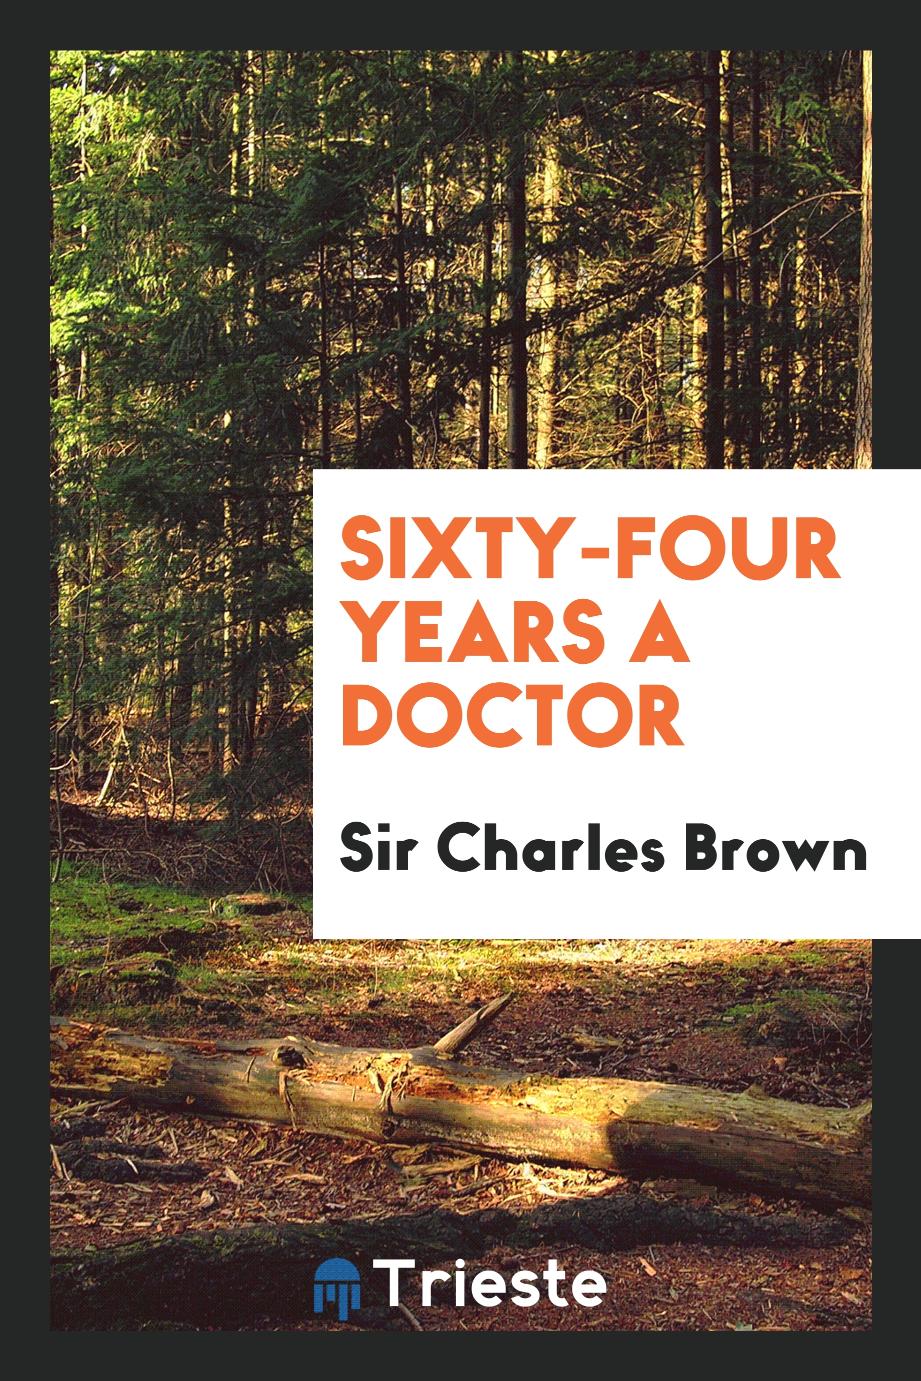 Sixty-four years a doctor